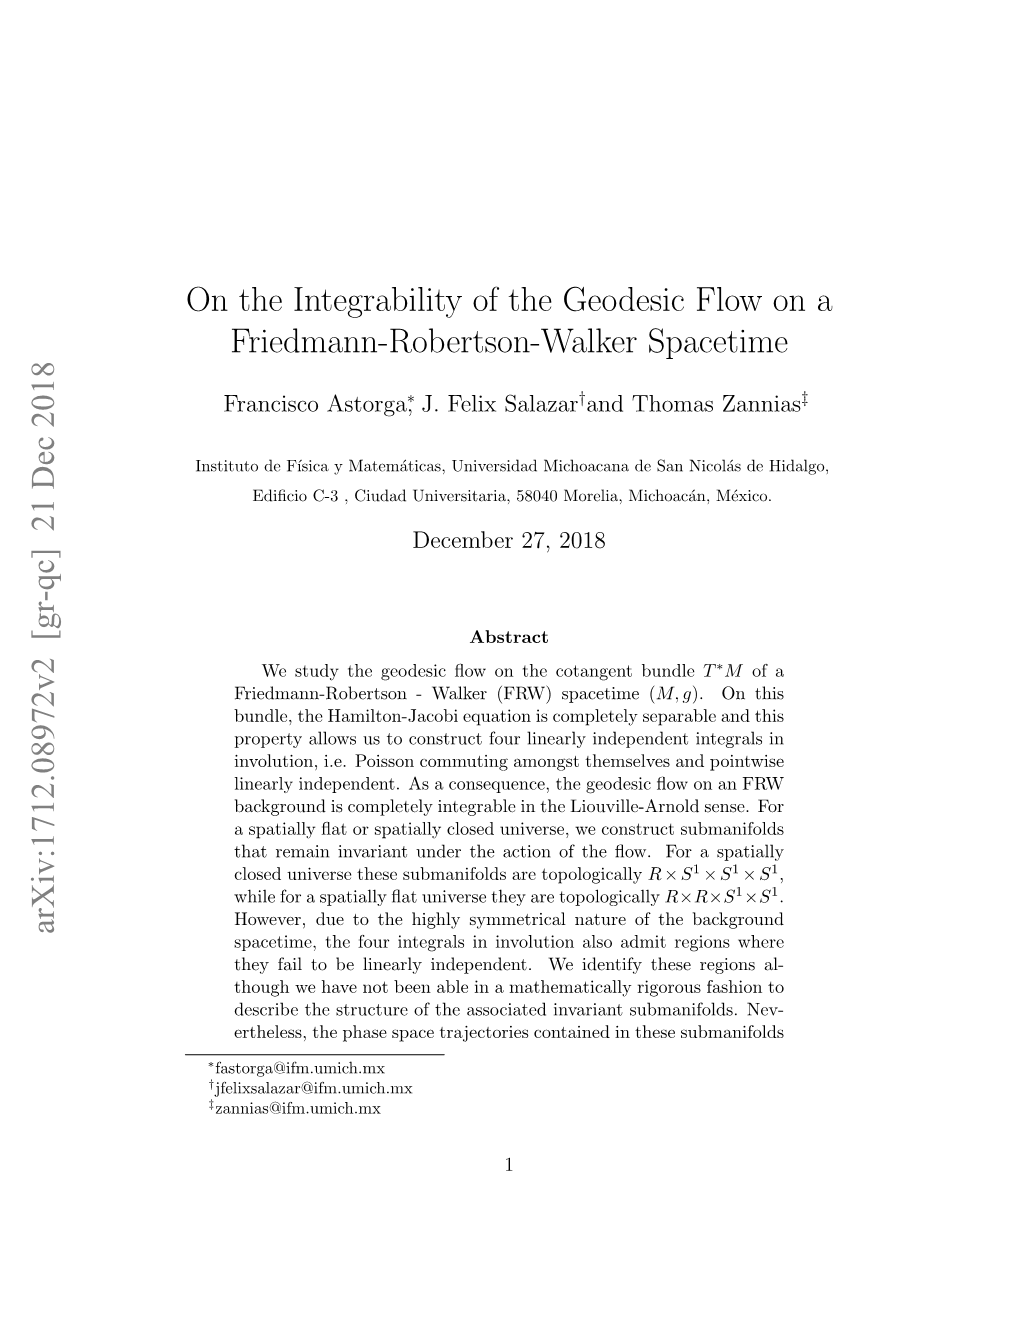 On the Integrability of the Geodesic Flow on a Friedmann-Robertson-Walker Spacetime